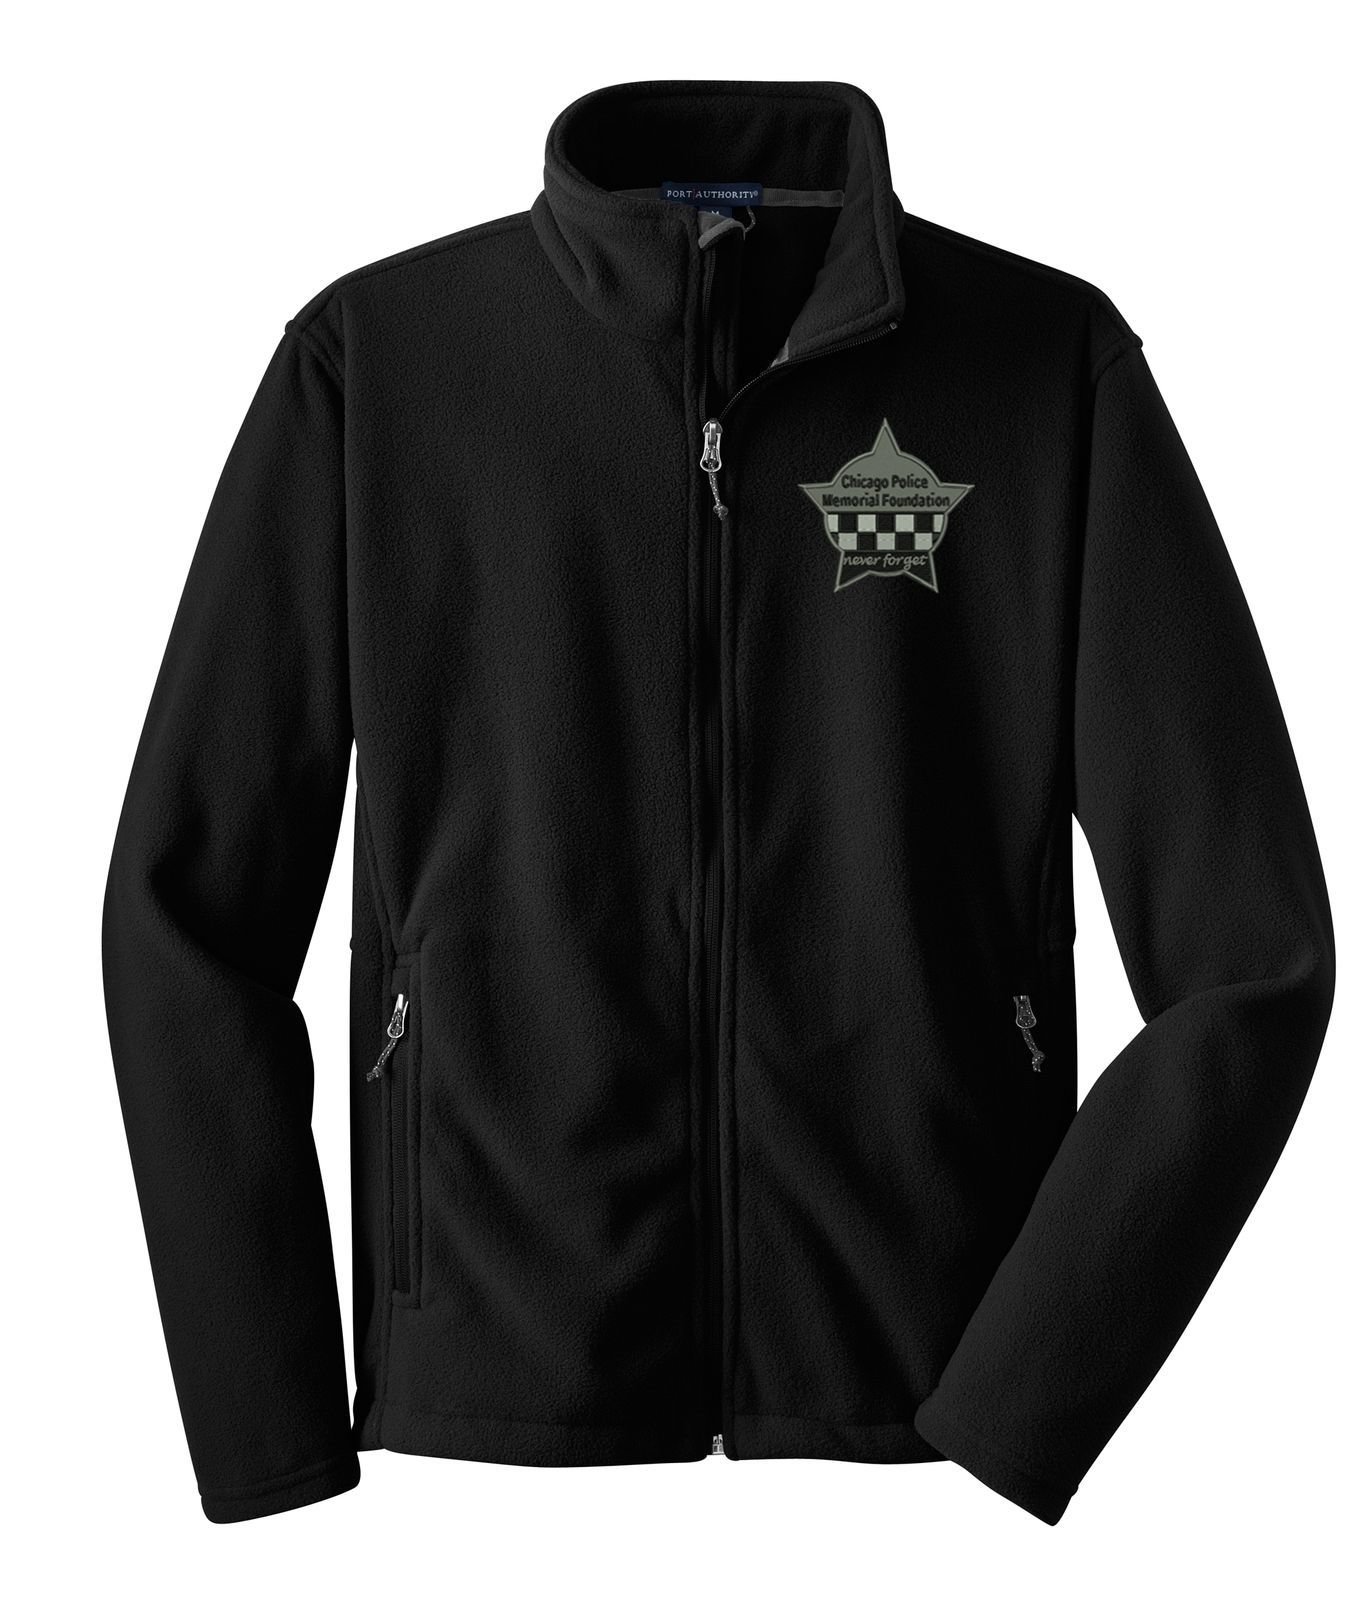 CPD Memorial Full Zip Fleece Jacket W/Embroidered Star Logo F217 | Chicago  Police Memorial Foundation